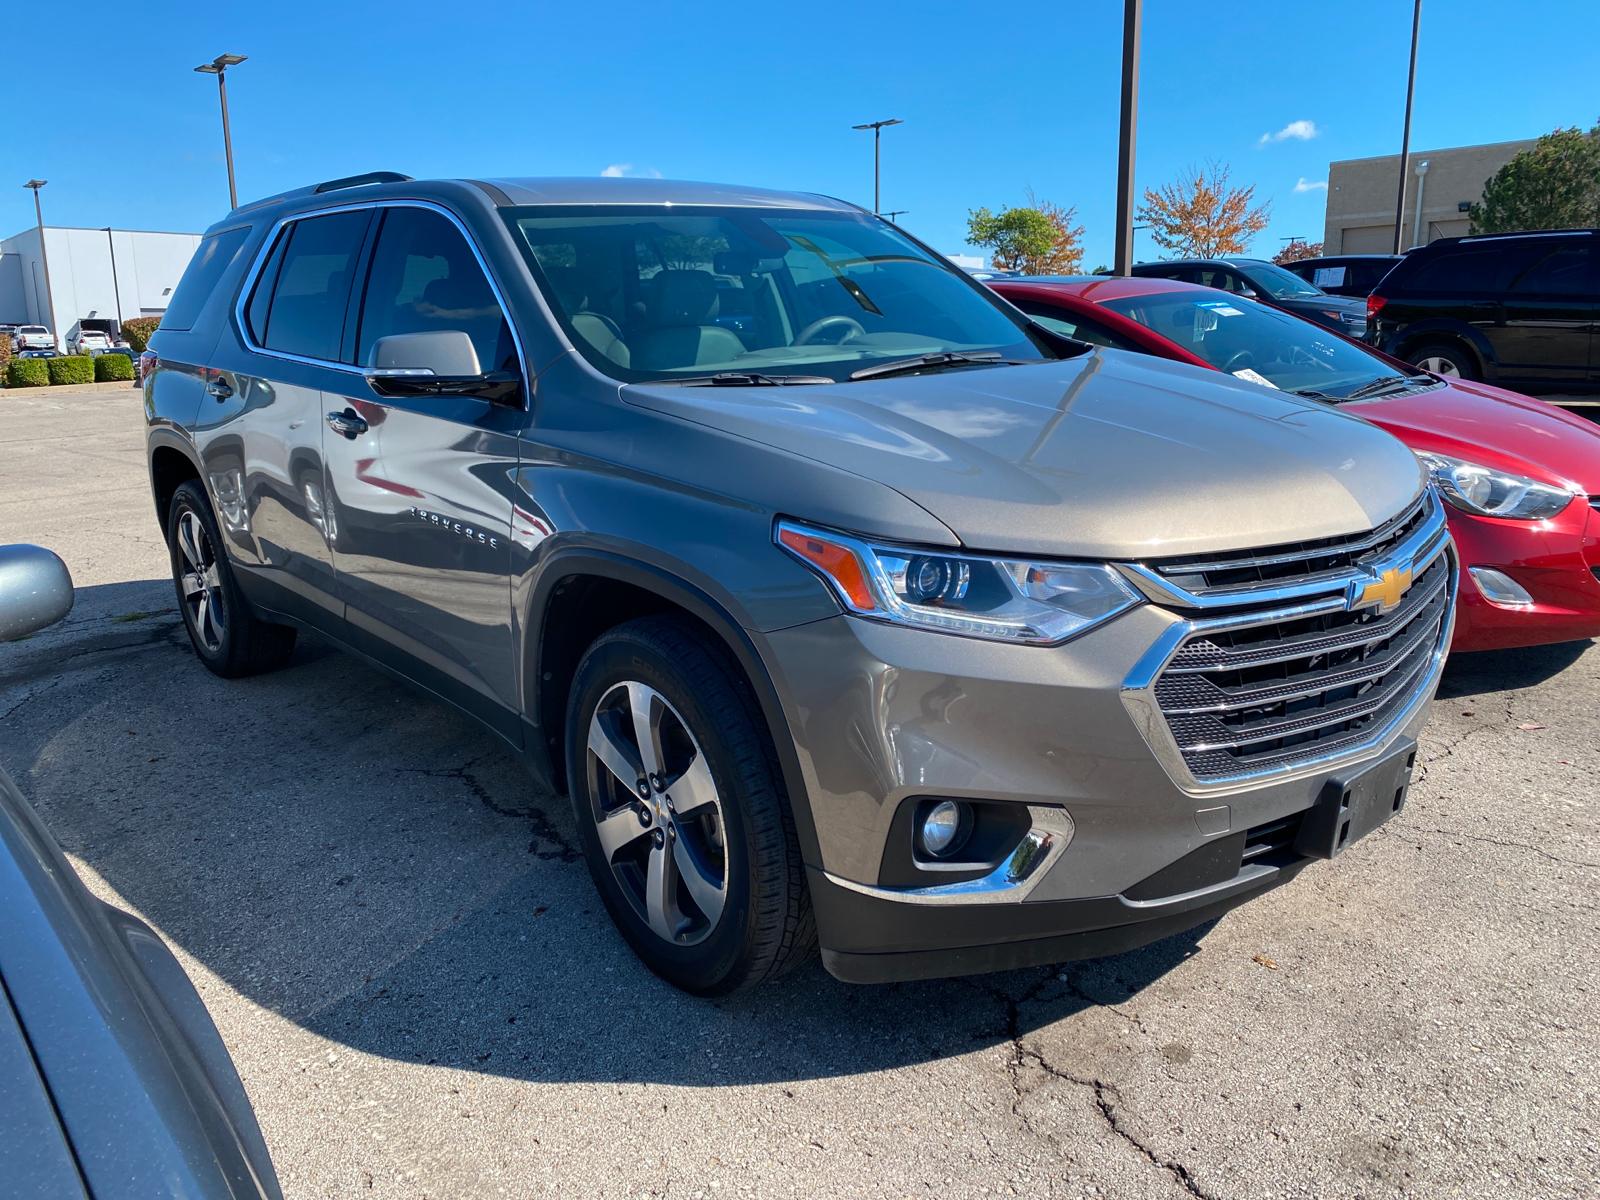 PreOwned 2018 Chevrolet Traverse FWD 4dr LT Leather w/3LT